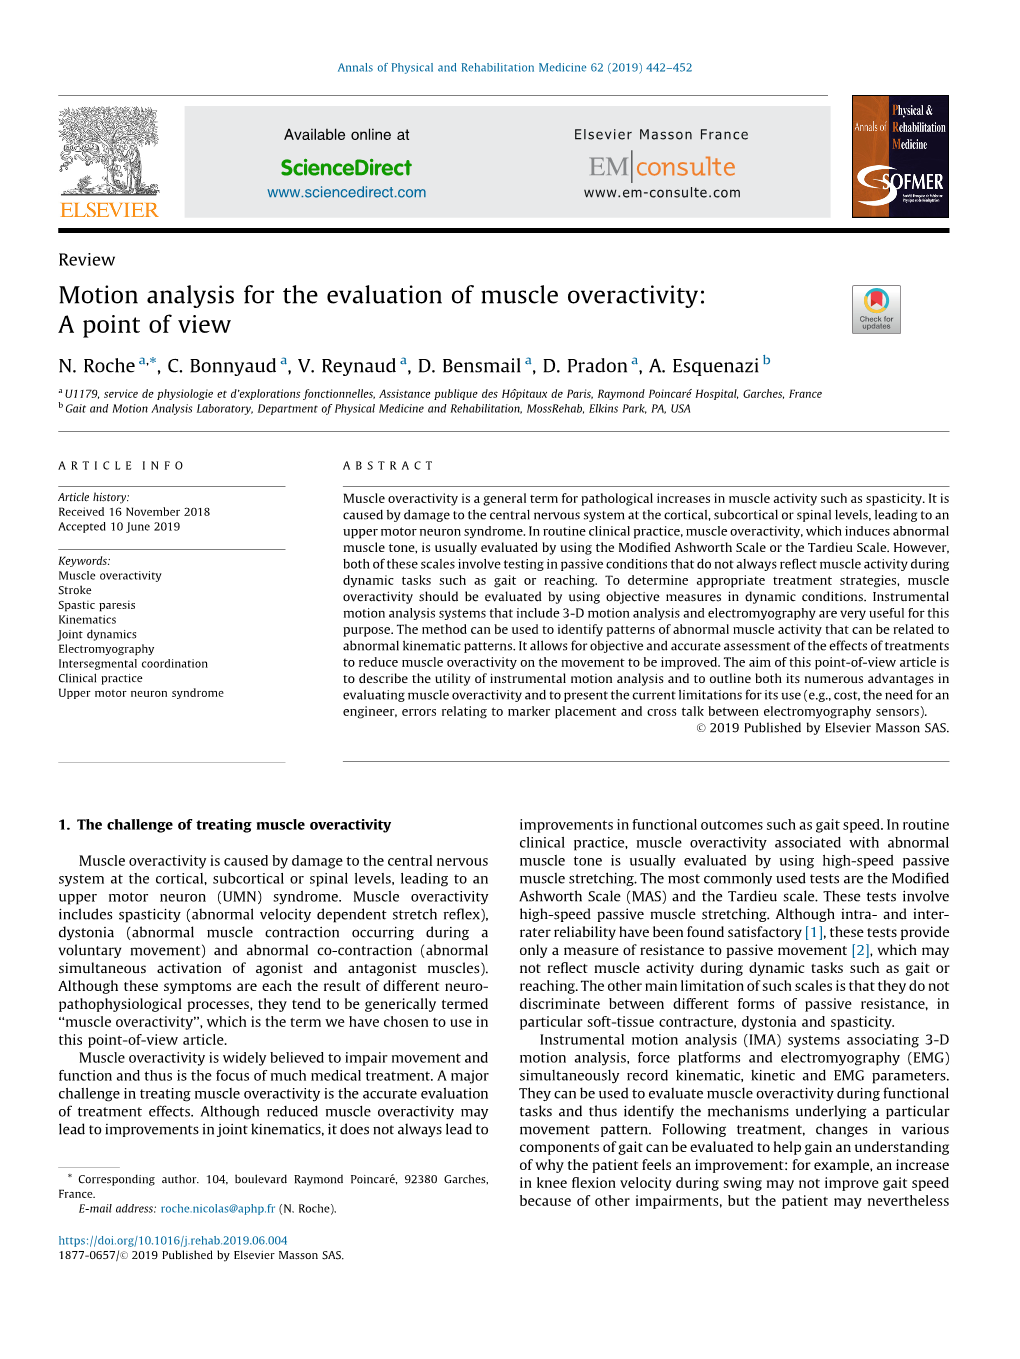 Motion Analysis for the Evaluation of Muscle Overactivity